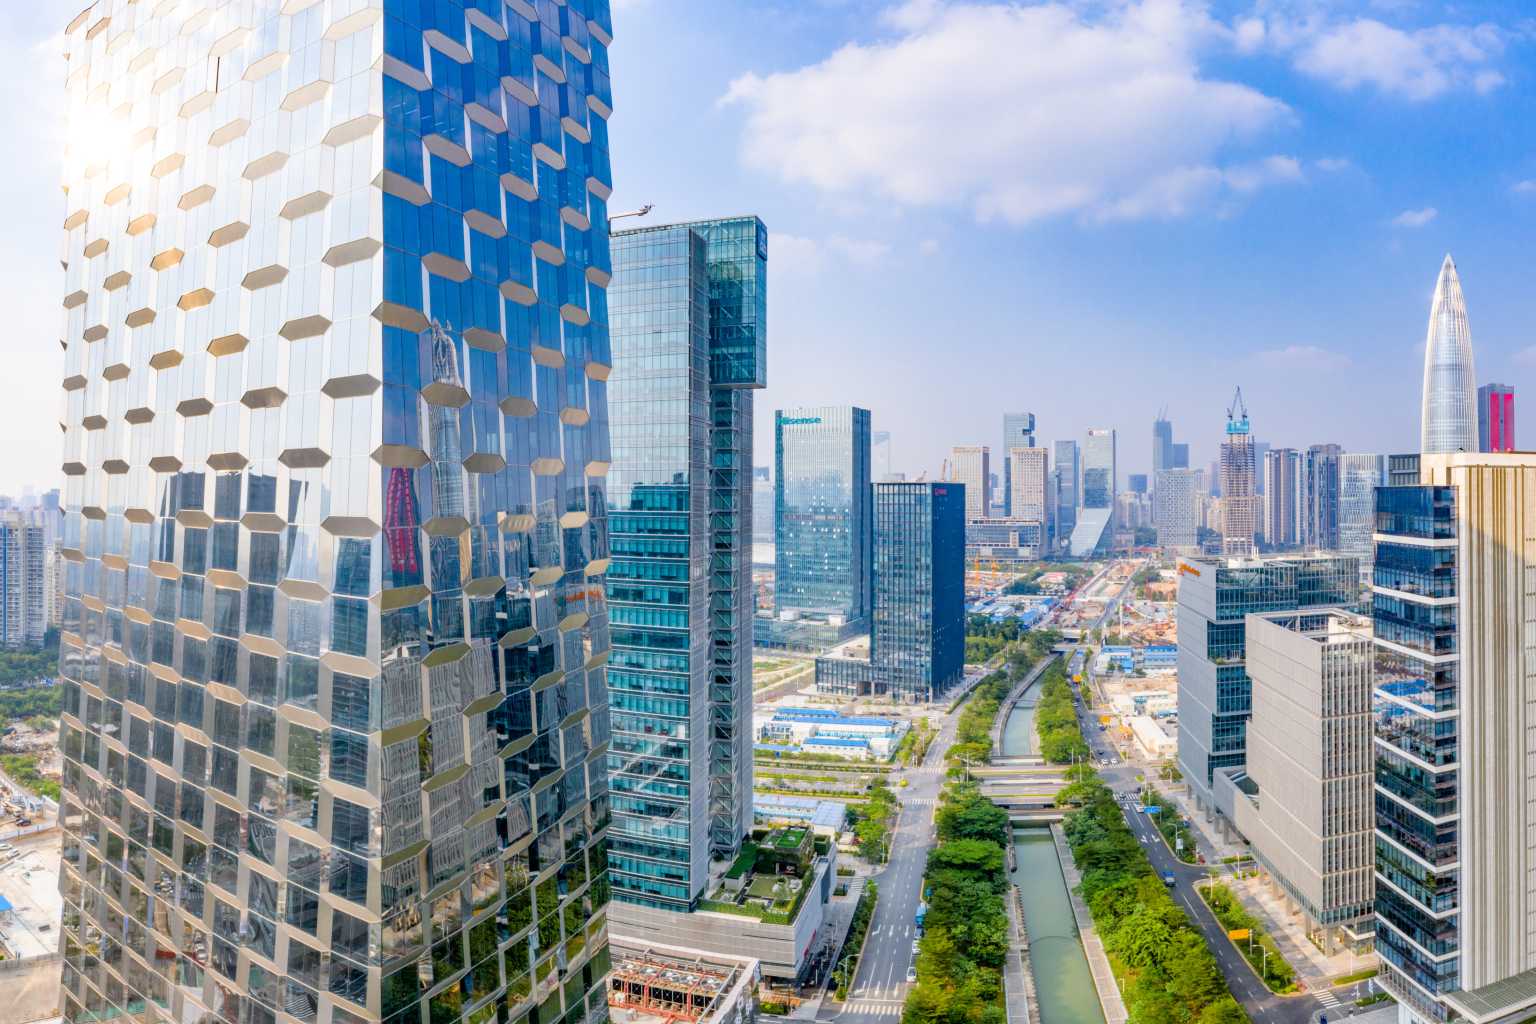 Office & Retail Property Predictions For Asia Pacific In 2022